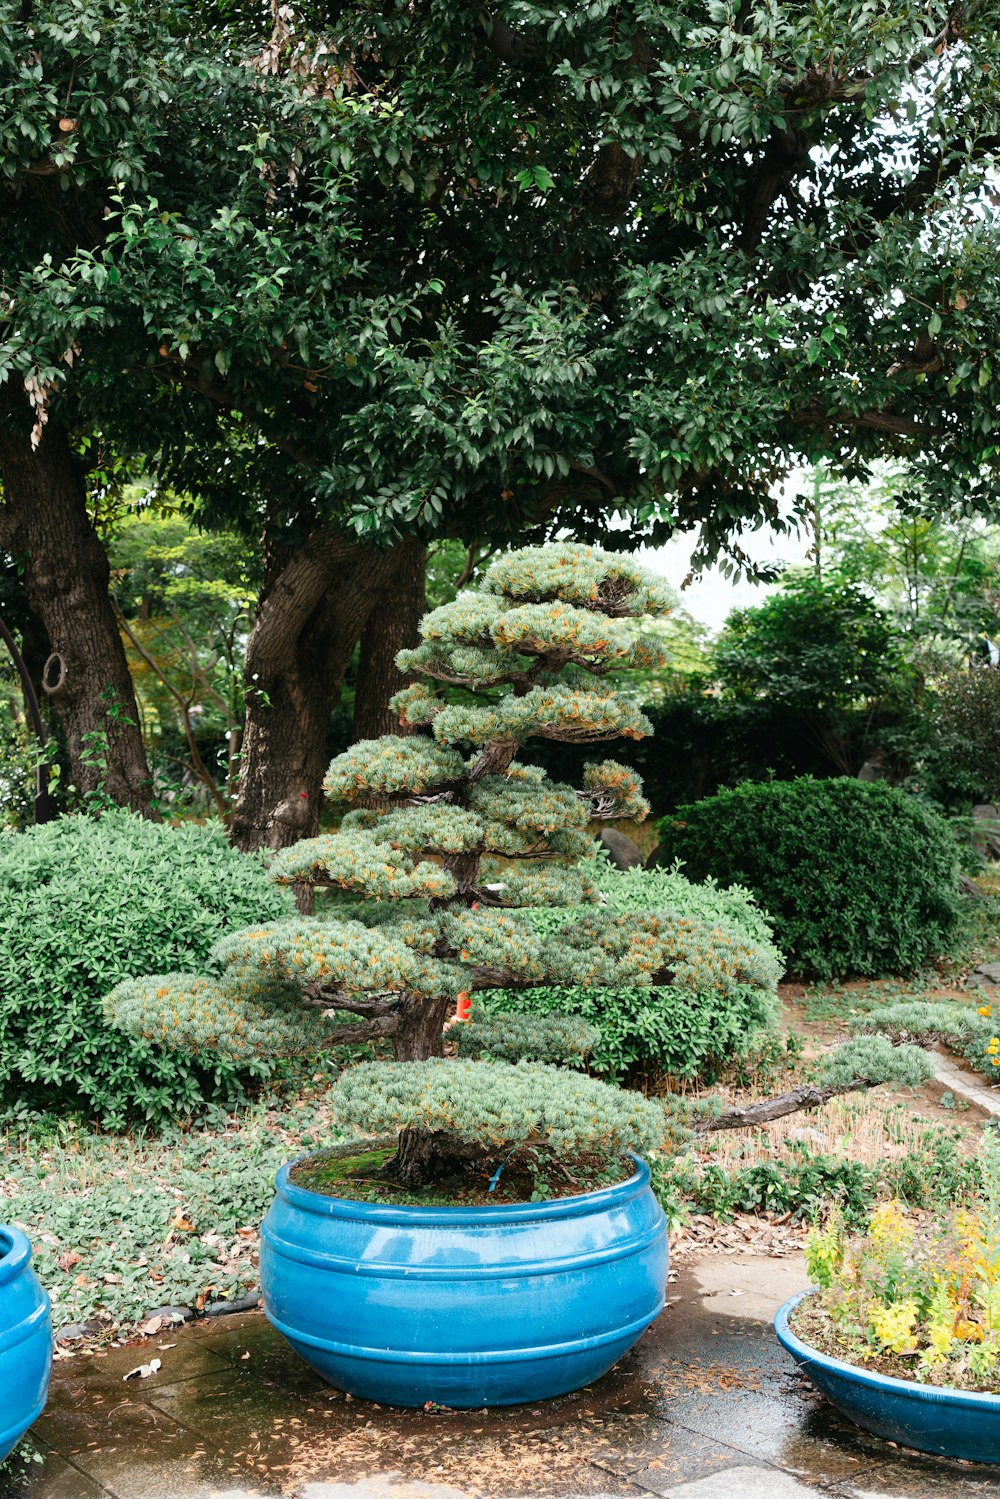 a couple of large blue pots sitting next to a tree